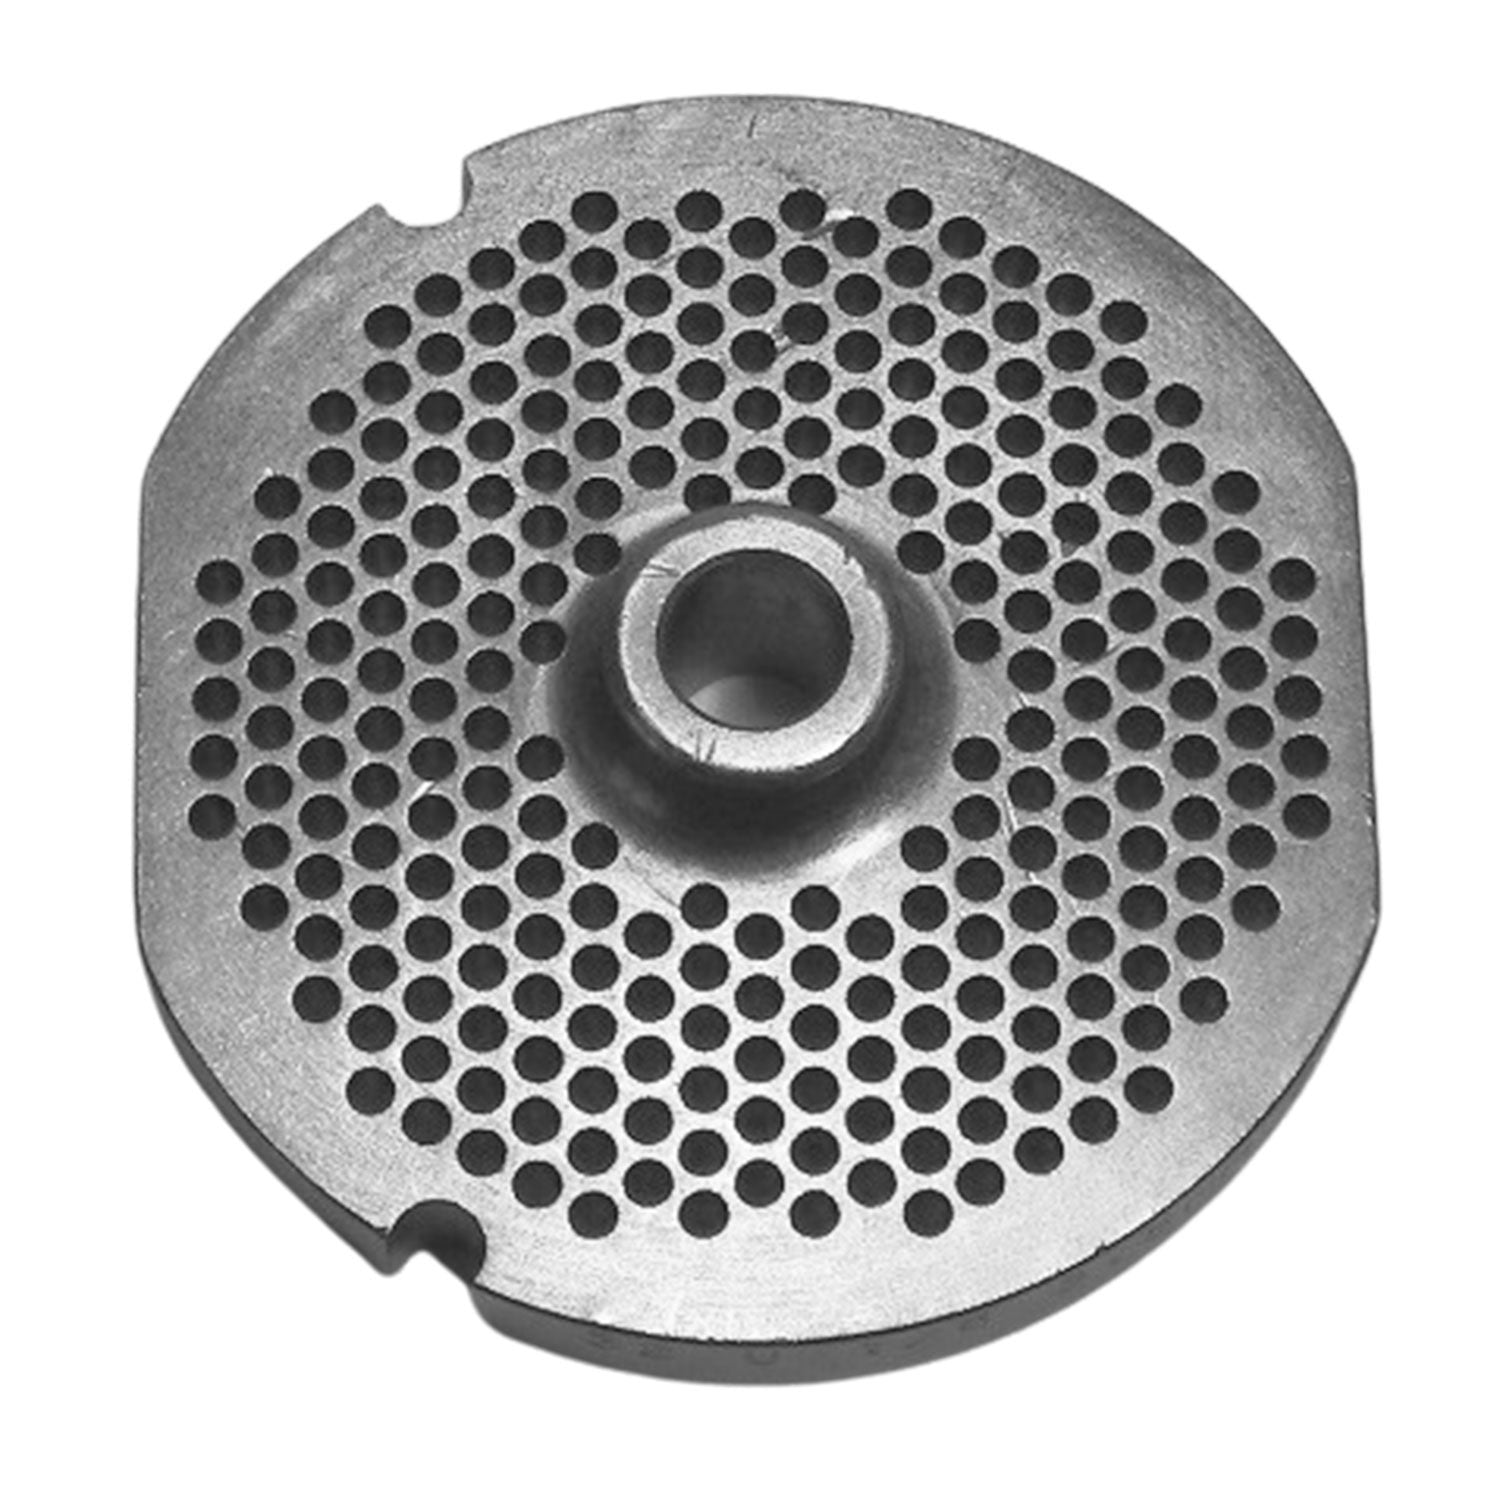 Size 32 Universal Hubbed Meat Grinder Plate, 1/8